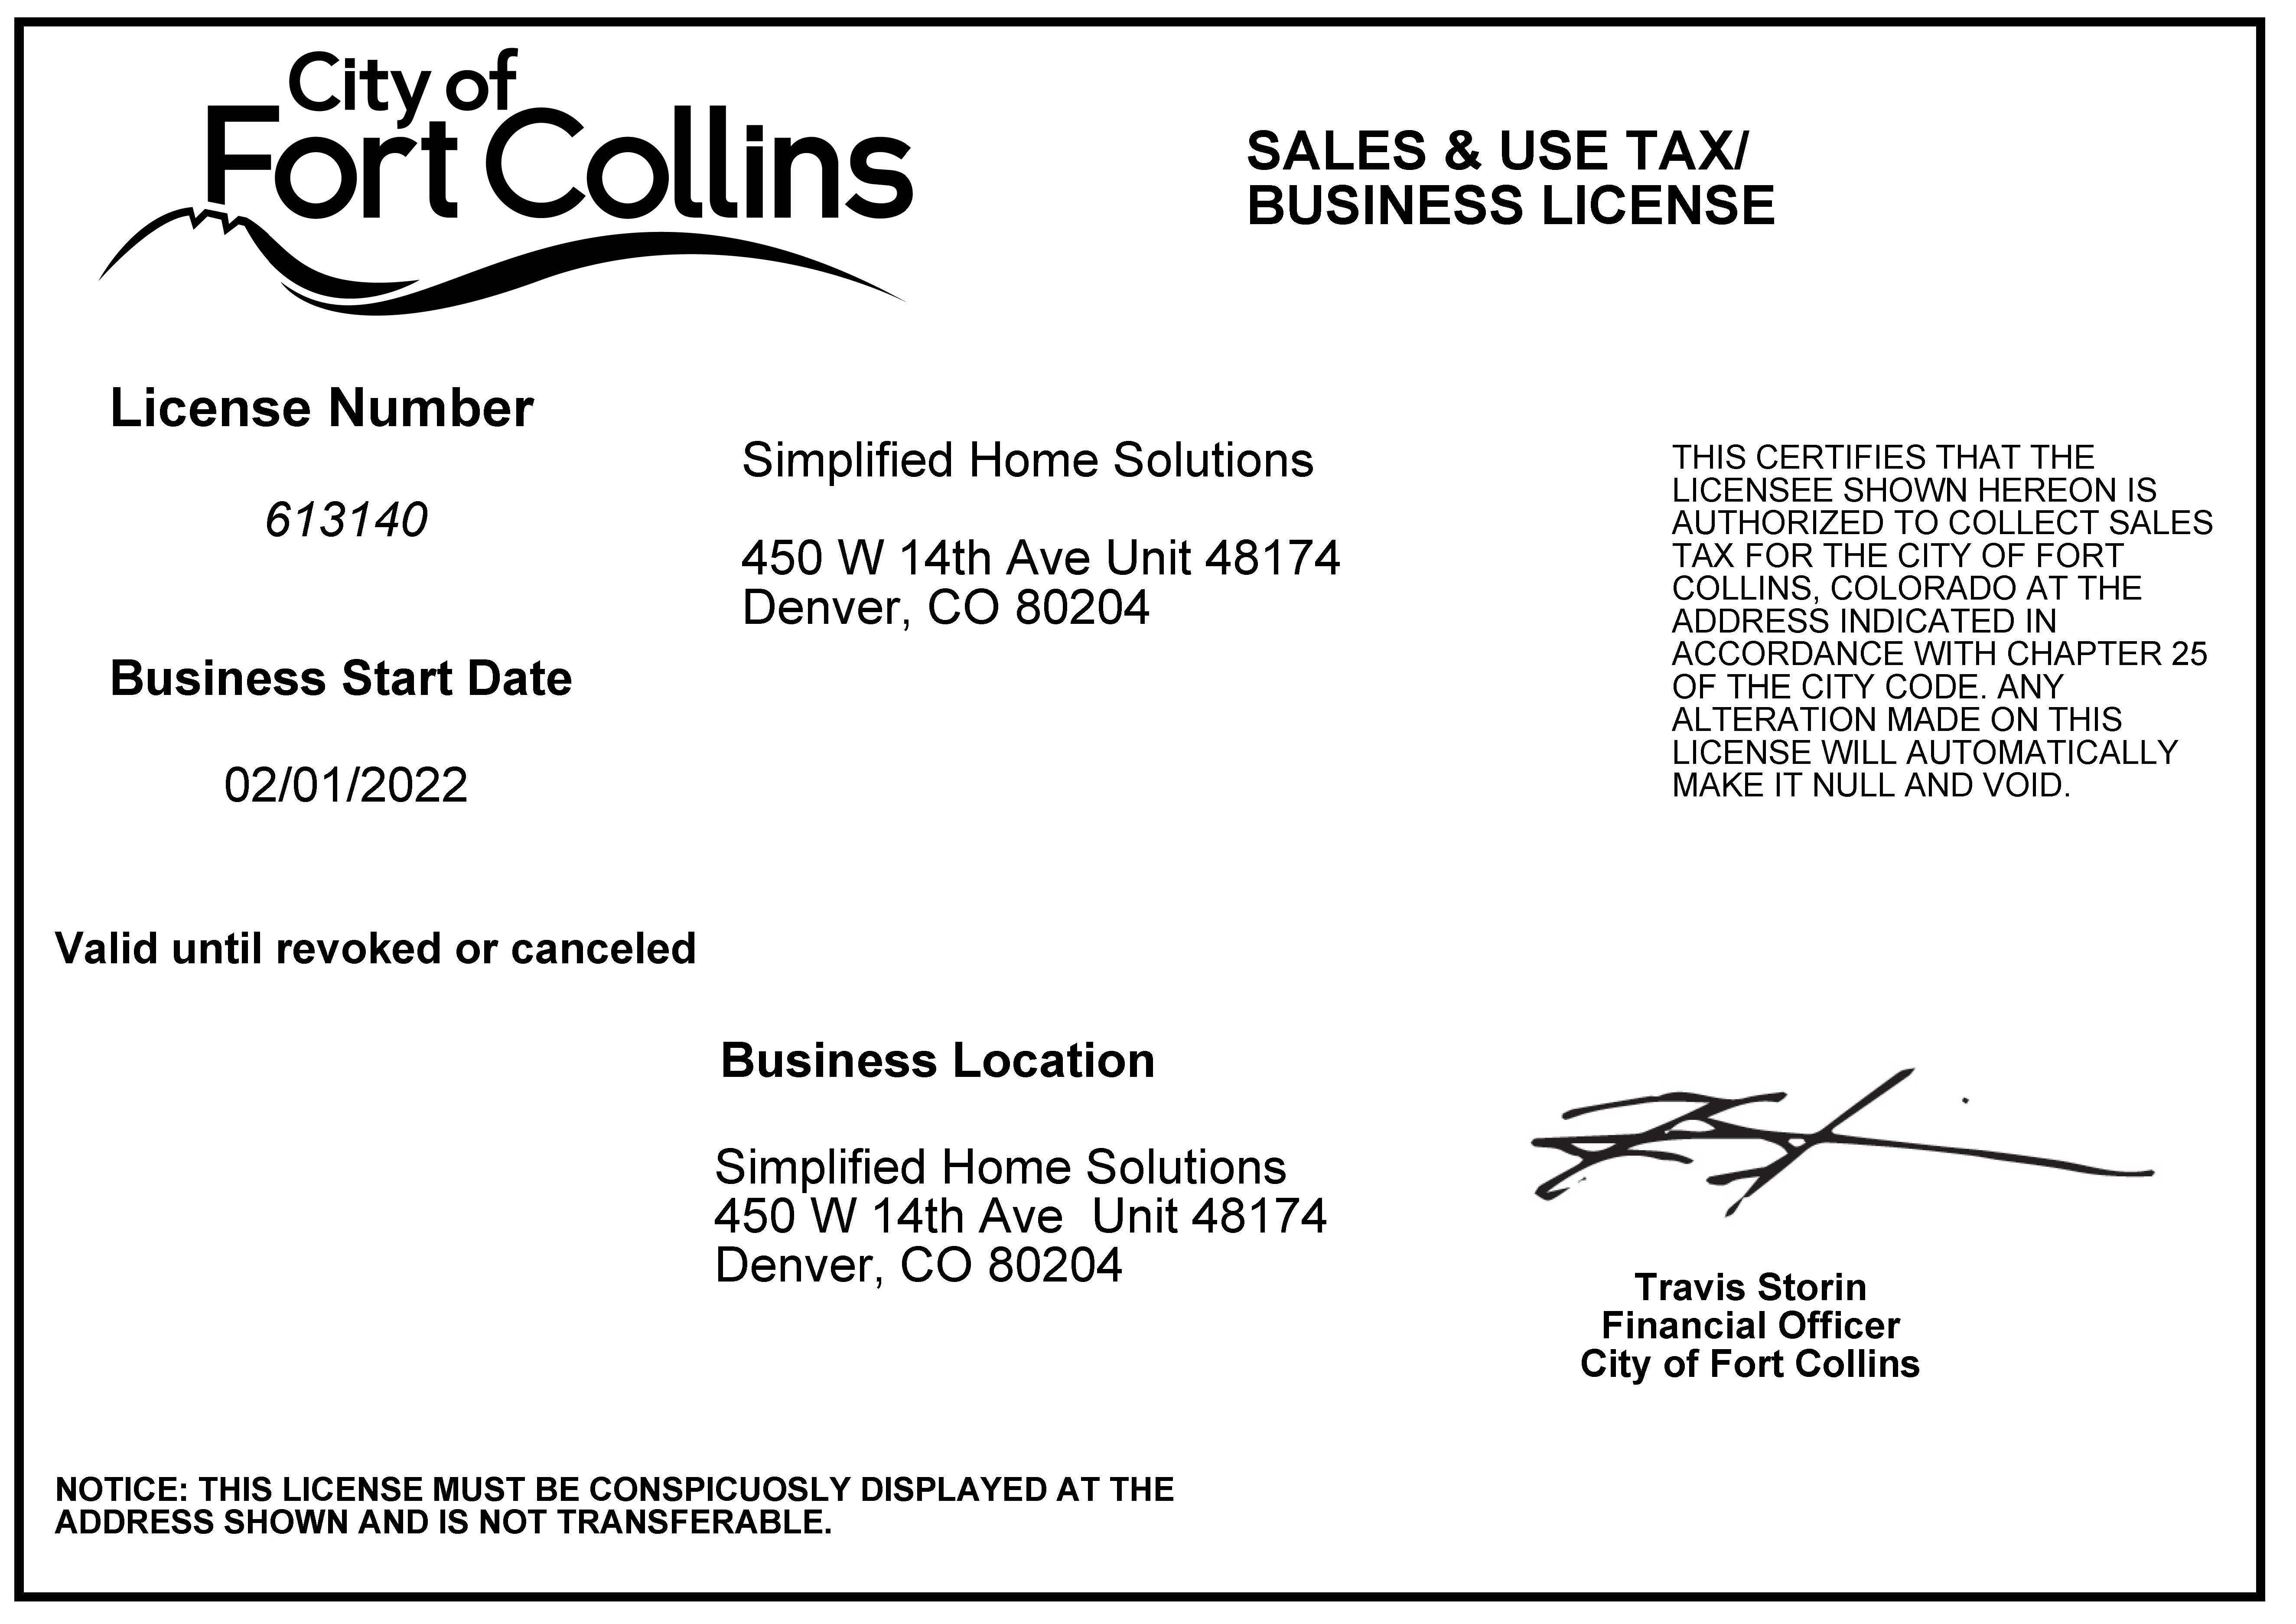 City of Fort Collins Sales - Use Tax License